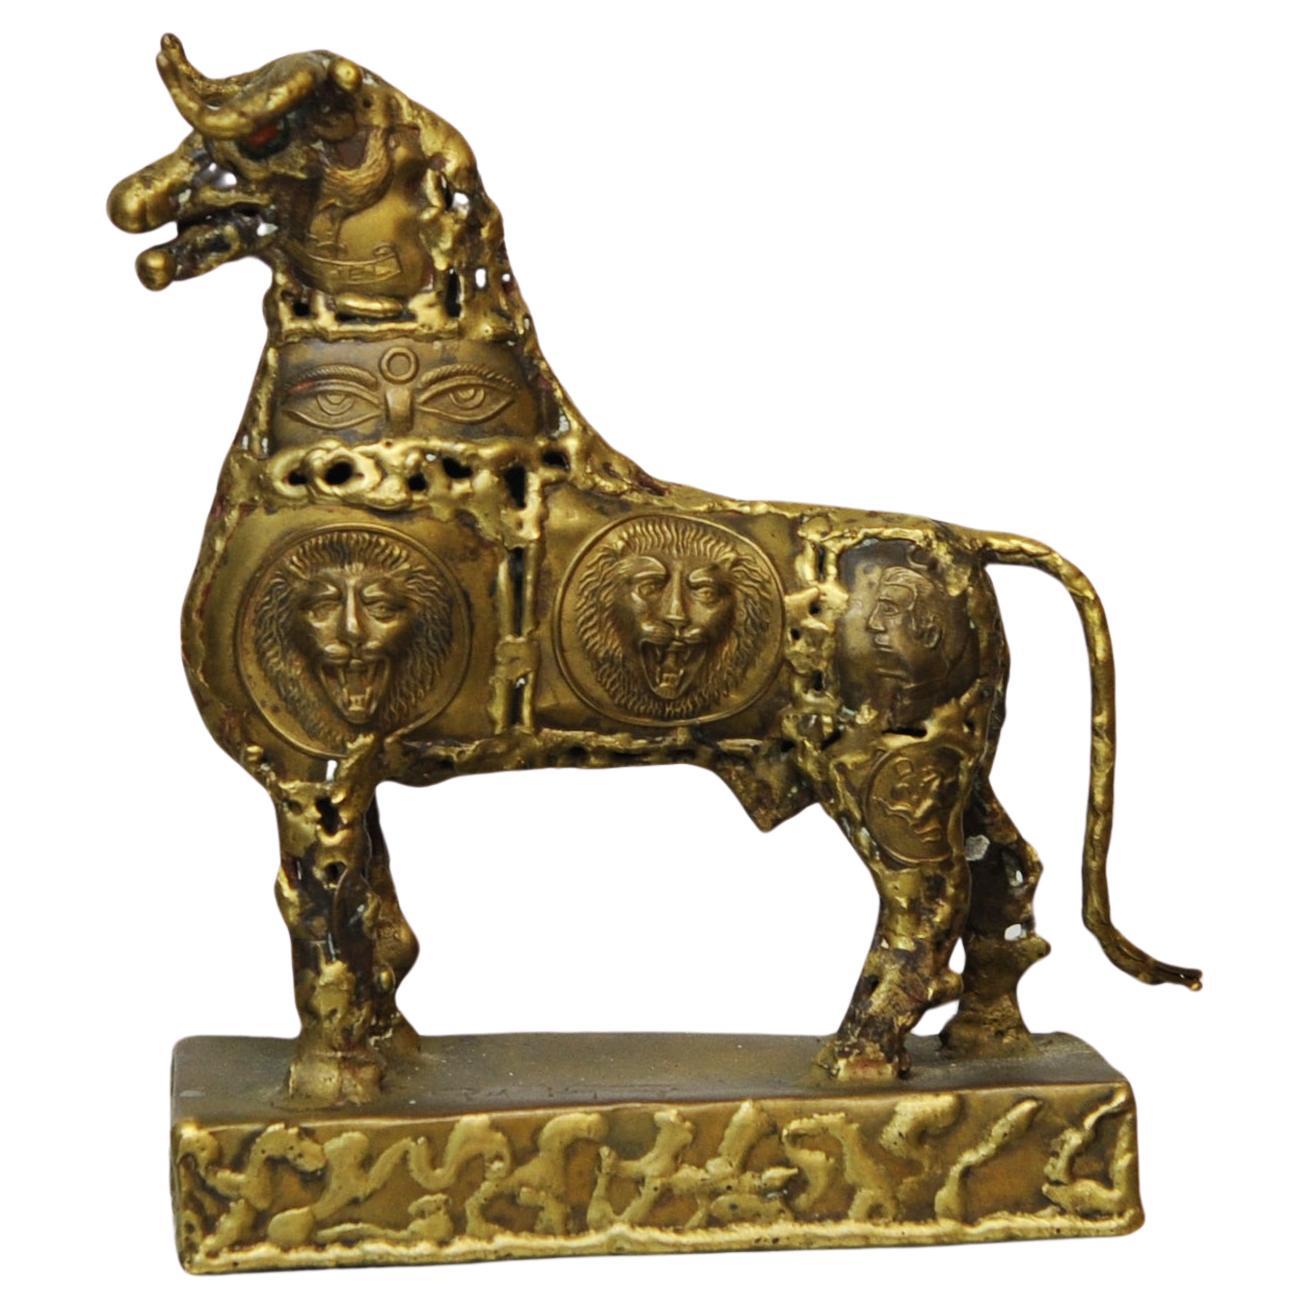 Brutalist Metal Sculpture of a Brass Bull by Pal Kepenyes, 1970s